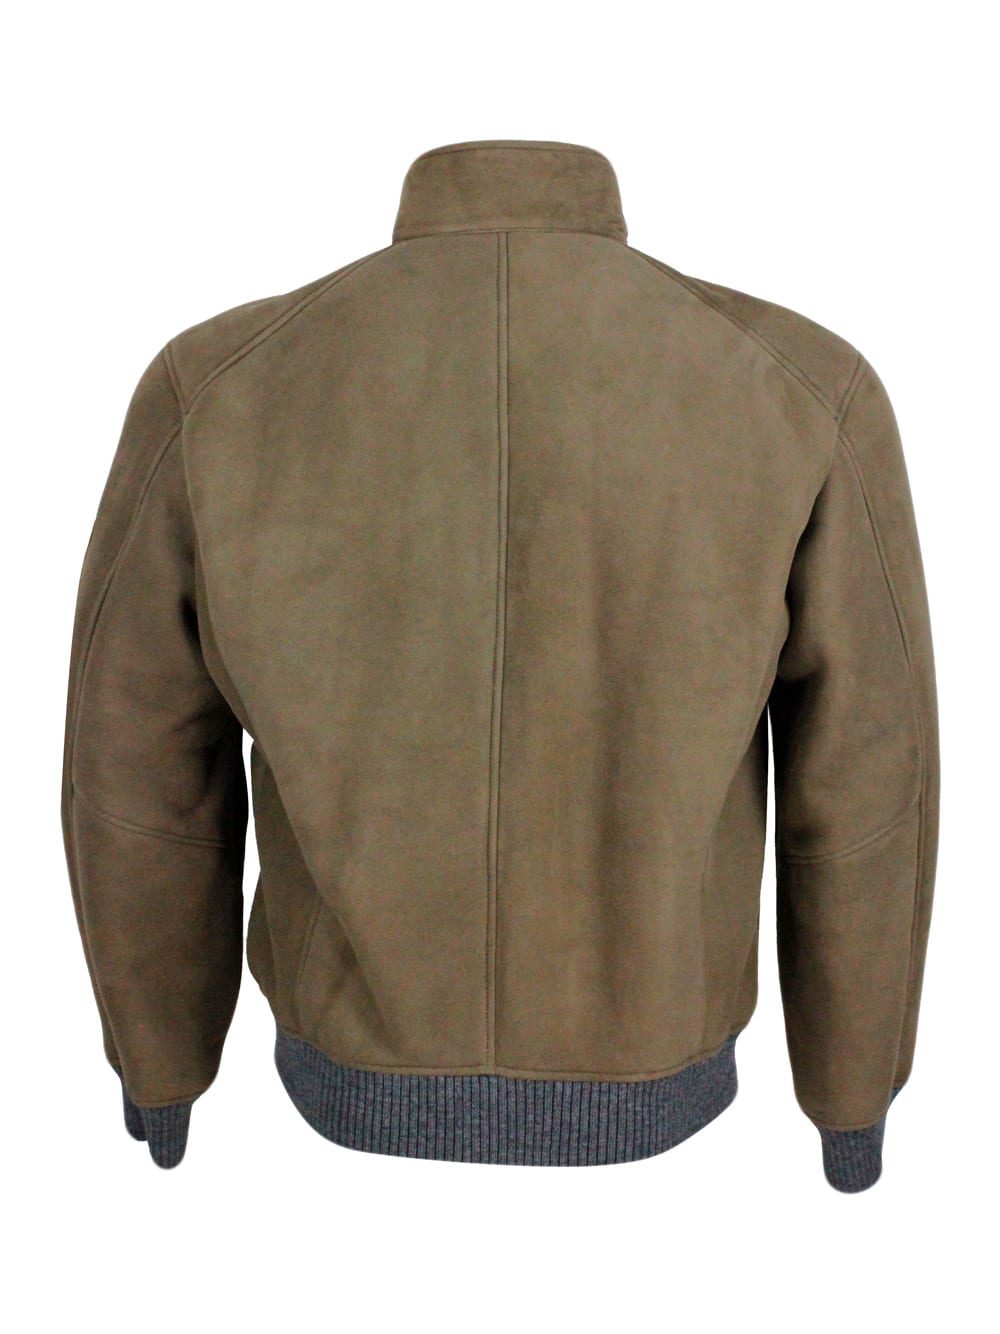 Shop Barba Napoli Bomber Jacket In Fine And Soft Shearling Sheepskin With Stretch Knit Trims And Zip Closure. Front Po In Taupe